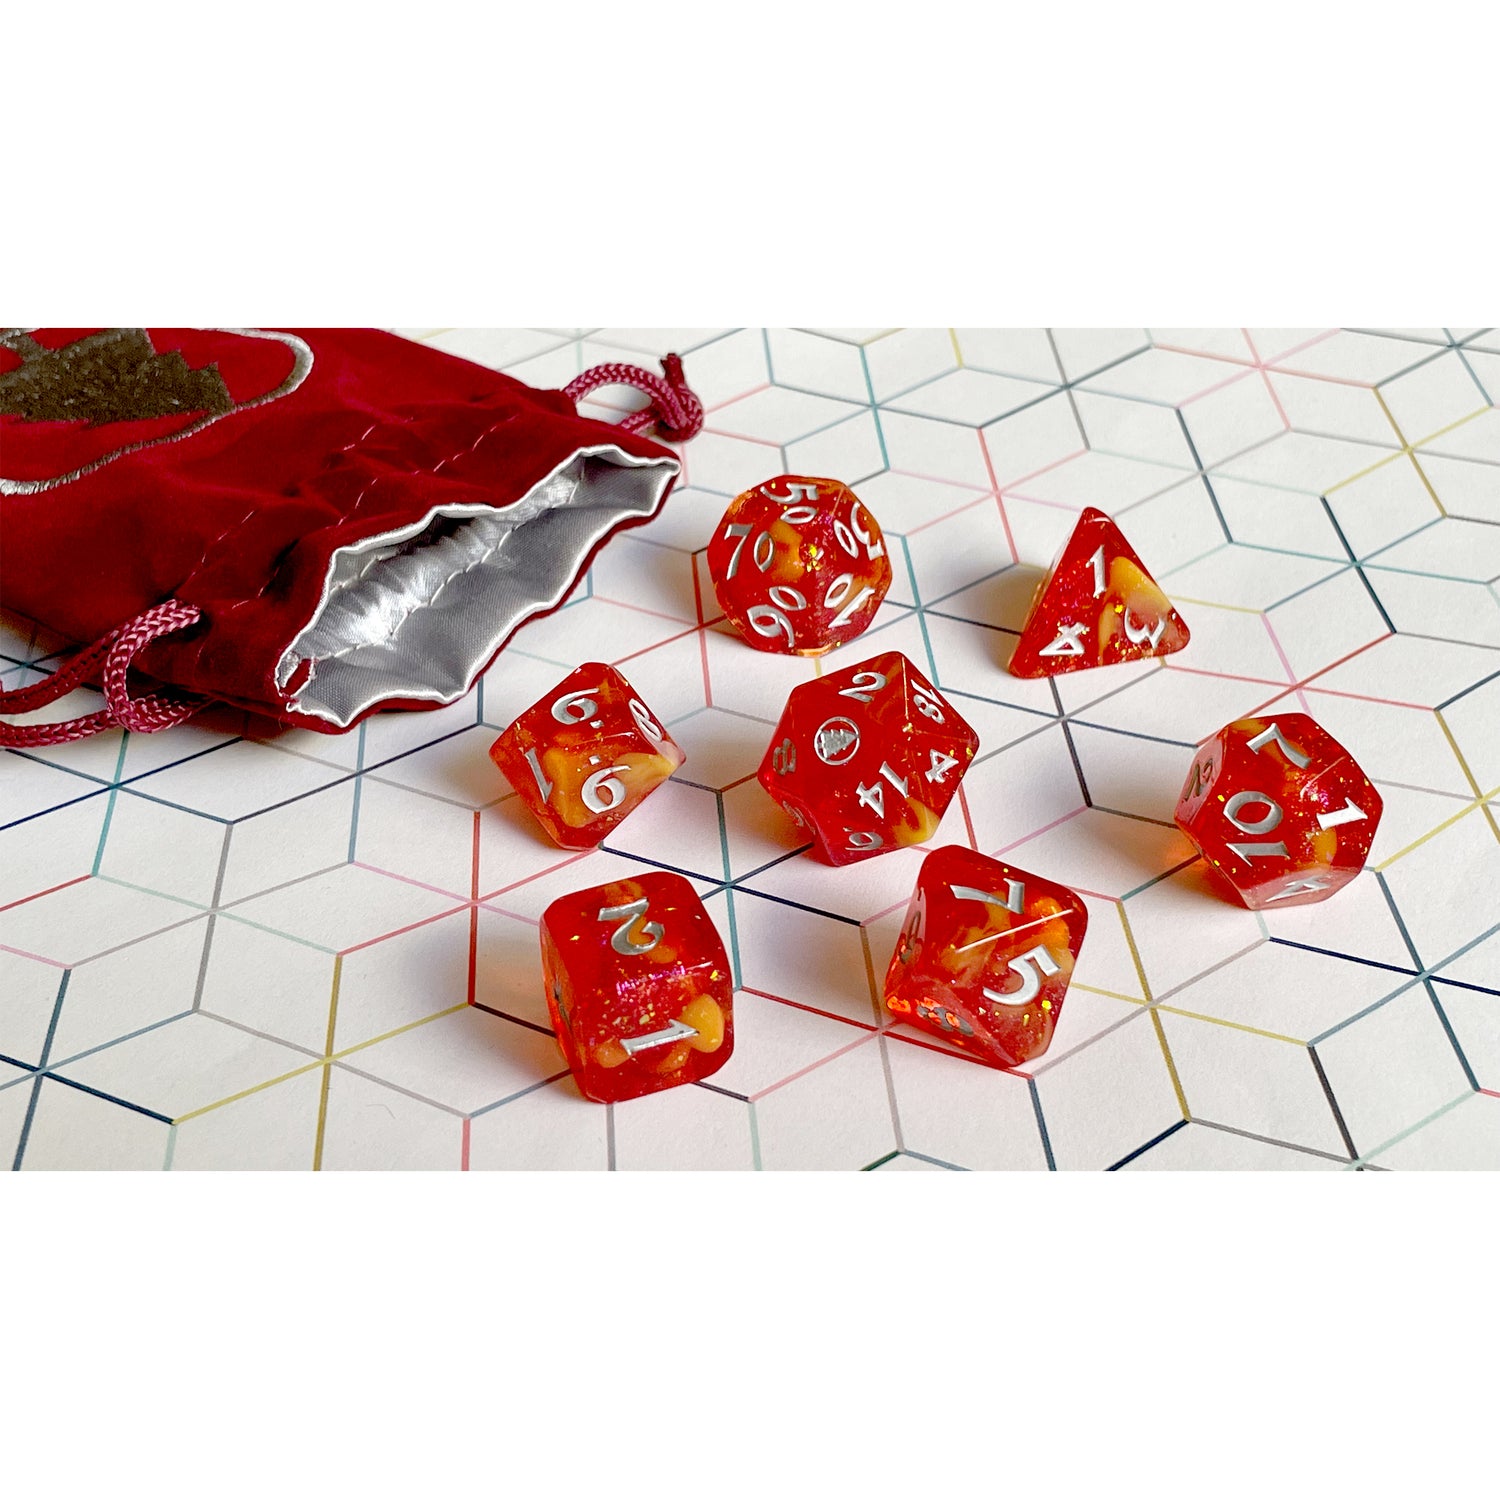 Image of an orange set of dice with silver lettering on  geometric backdrop. The dice has yellow veins and glitter running through the center. The 20 on the D20 is a silver pine tree in a circle. To the left of the dice is a red velvet bag with a silver lining and the same silver pine tree emblem.